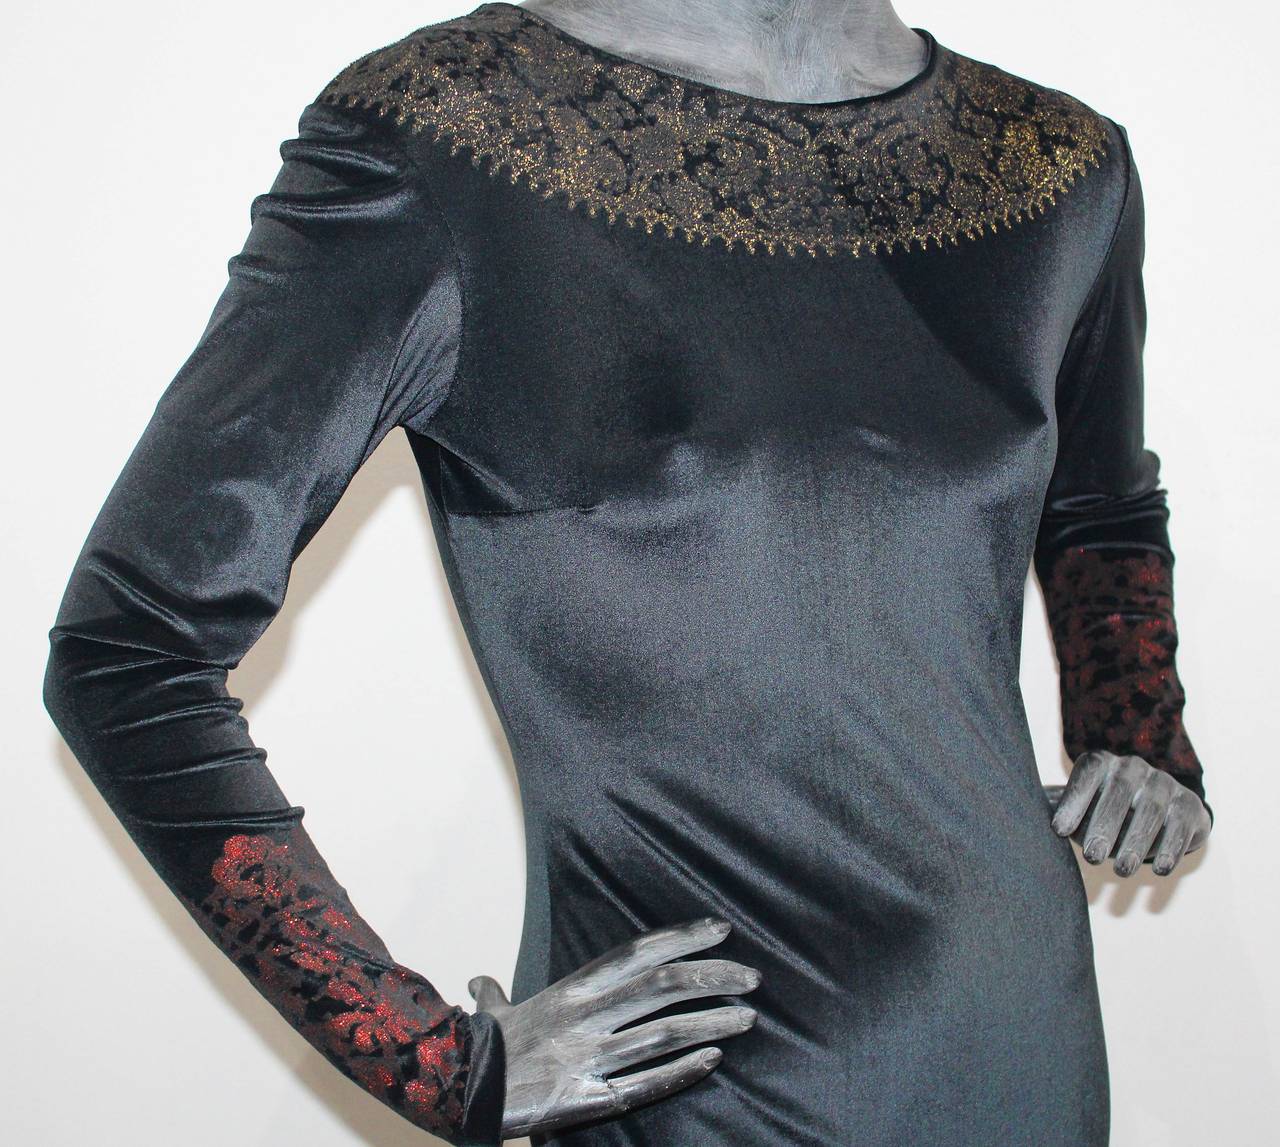 This dress comes from the famous A/W 1990 'Portrait' Collection. This full length body con dress is made of black velvet with decorative glitter.

Size '2'